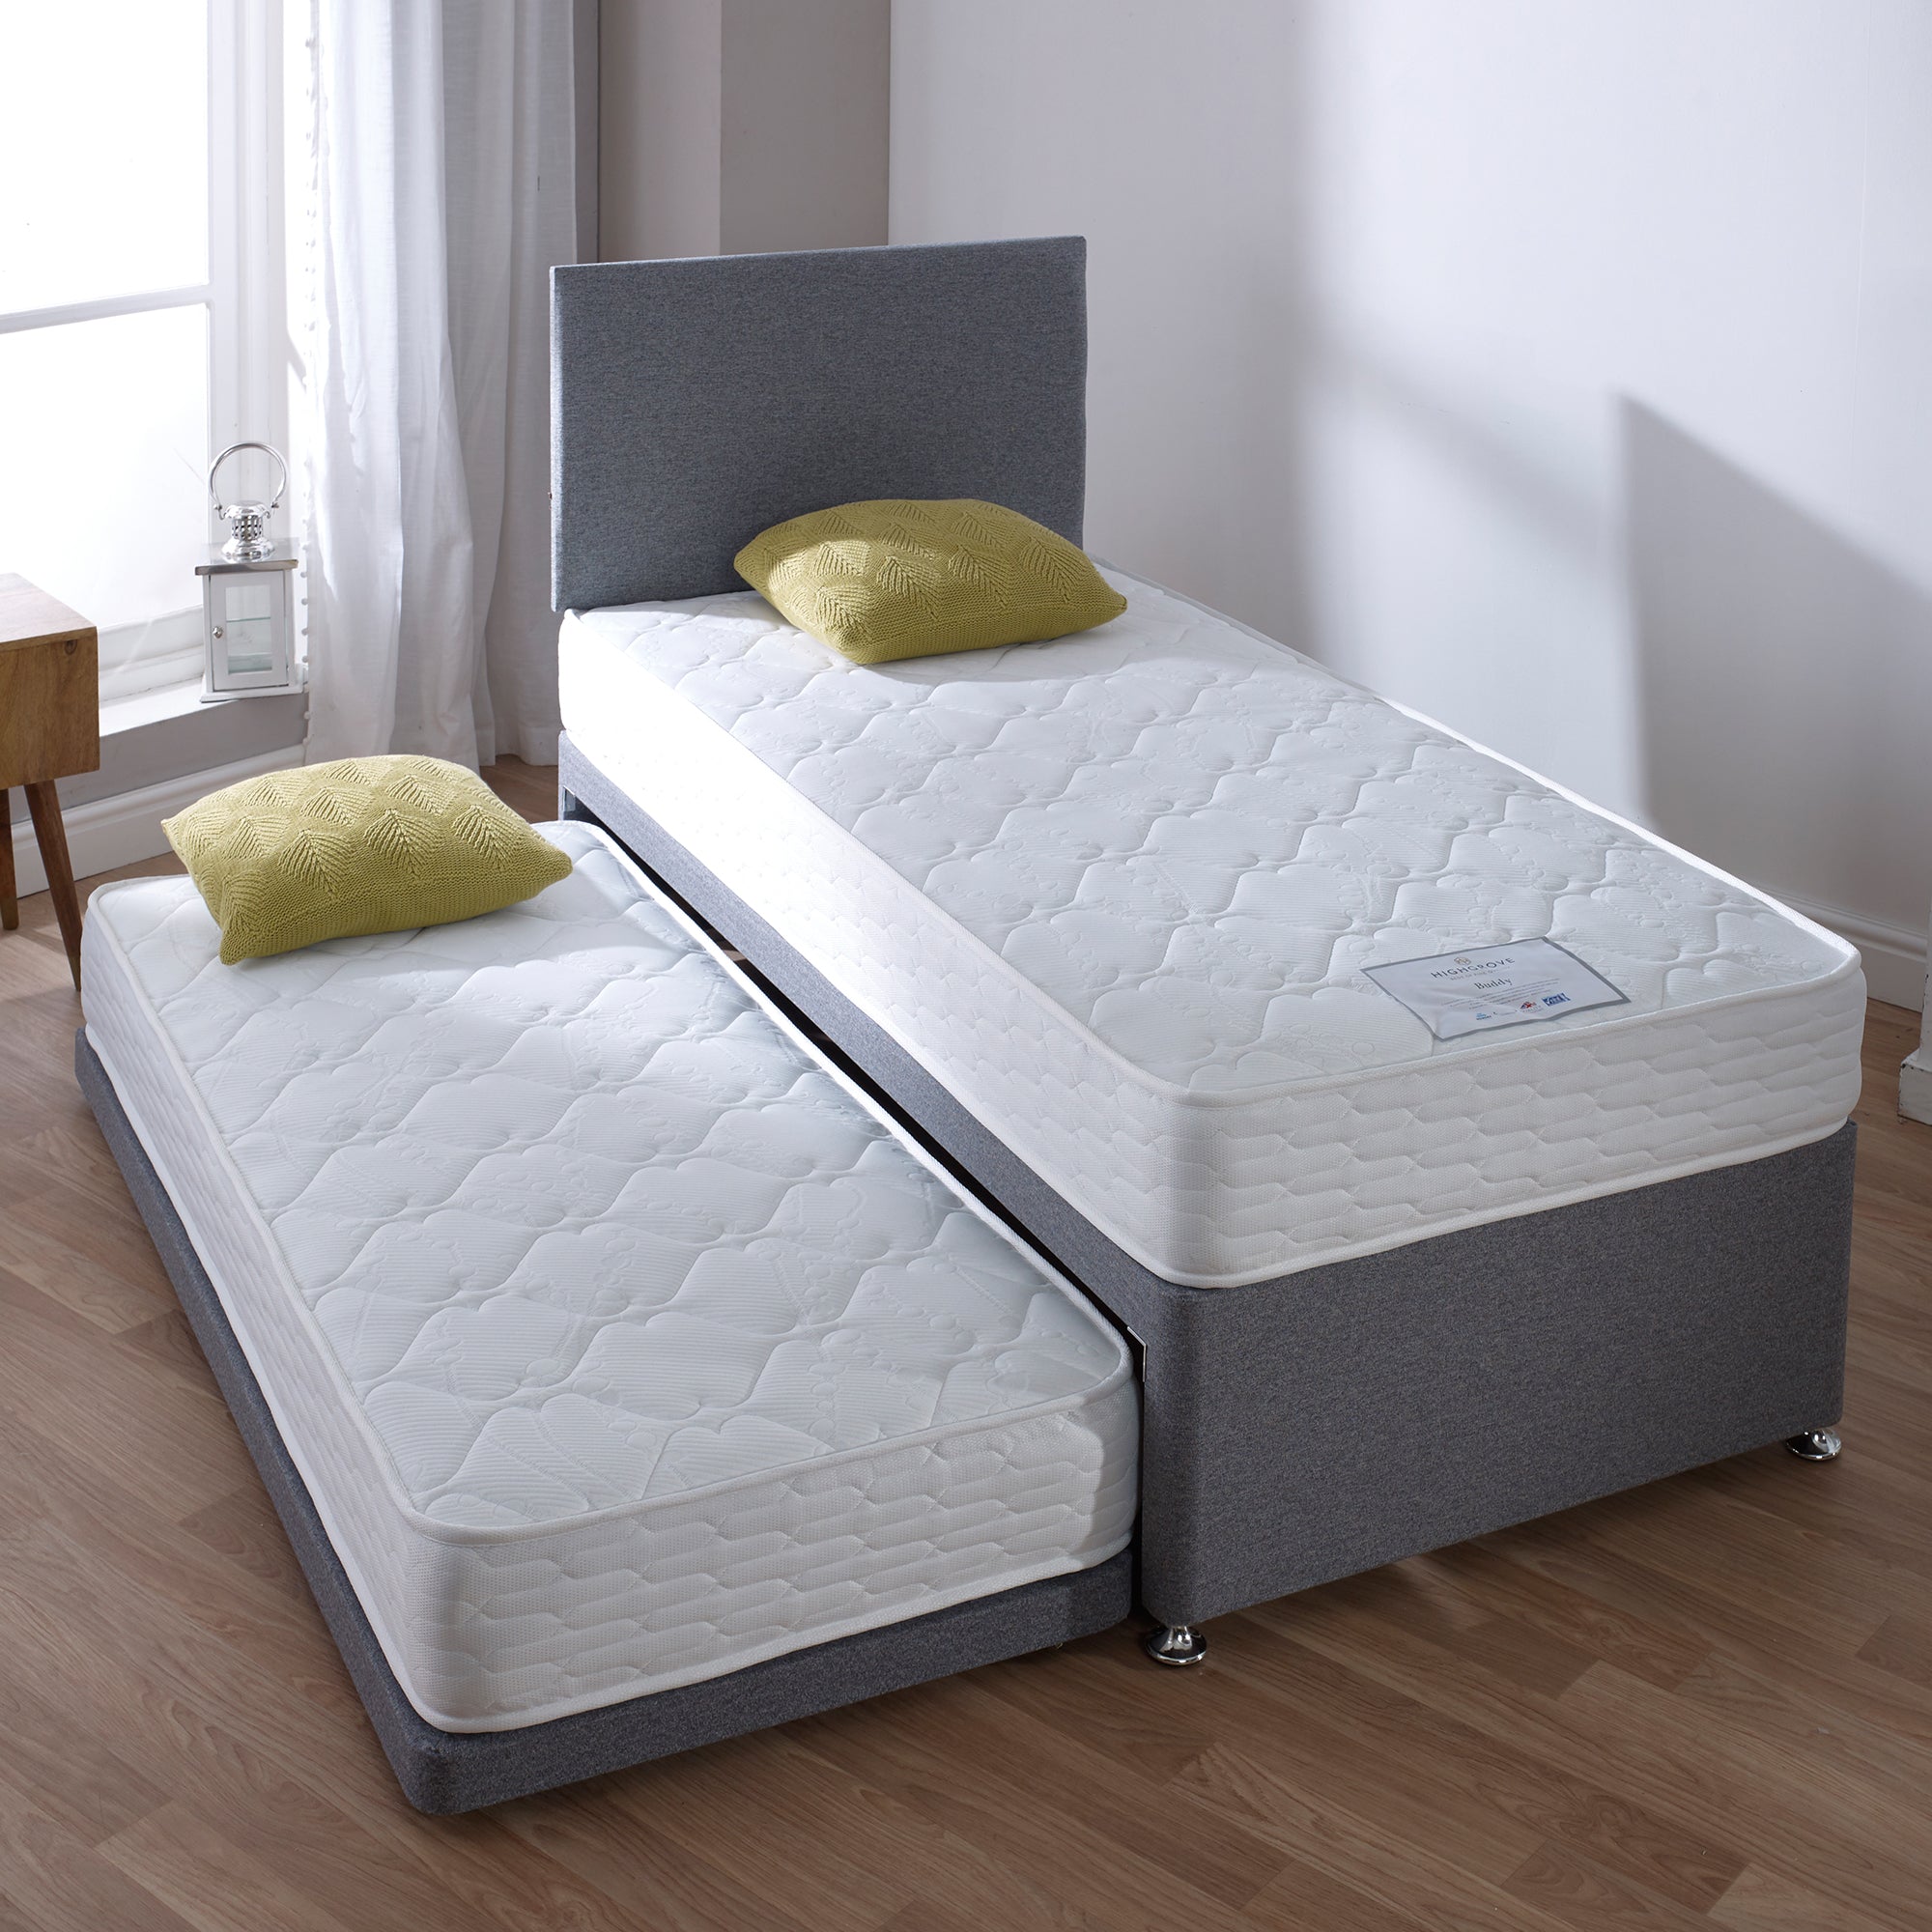 Buddy Guest Bed - Guest Bed Inc 2 x Open coil memory Matts in Grey 90cm